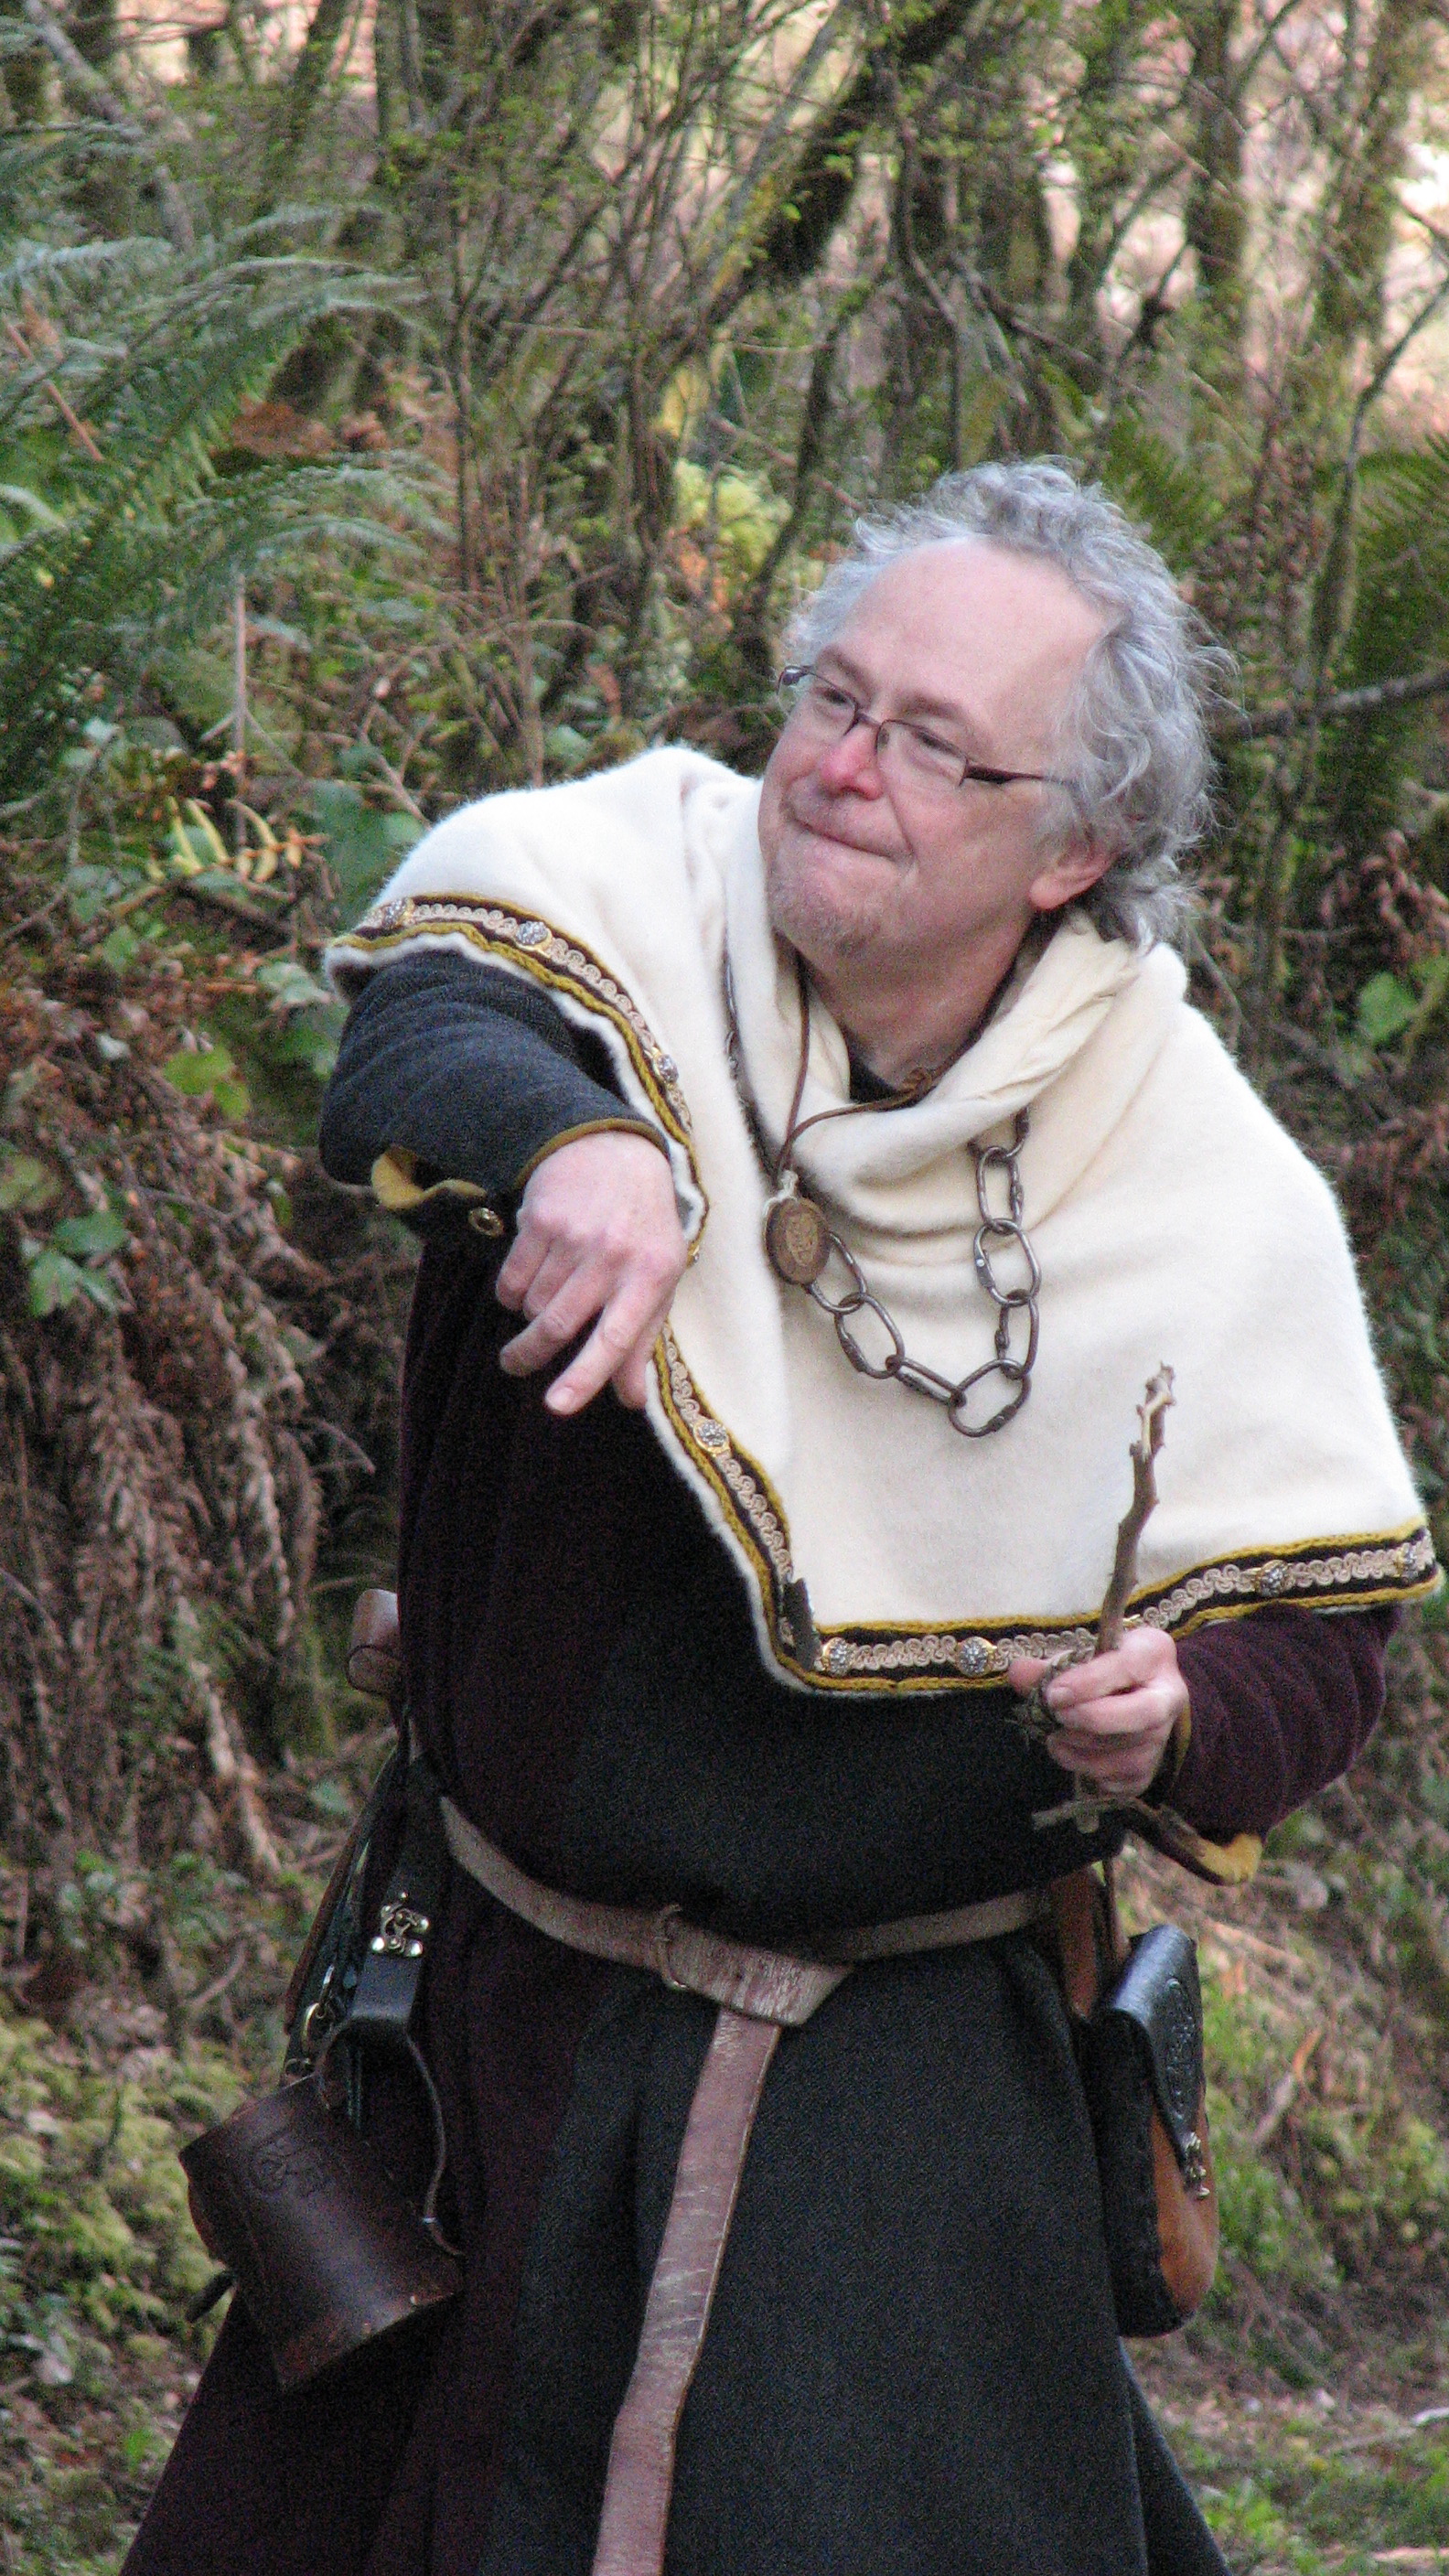 GregRobin Smith (G.Robin Smith) in clothing of the 12th Century